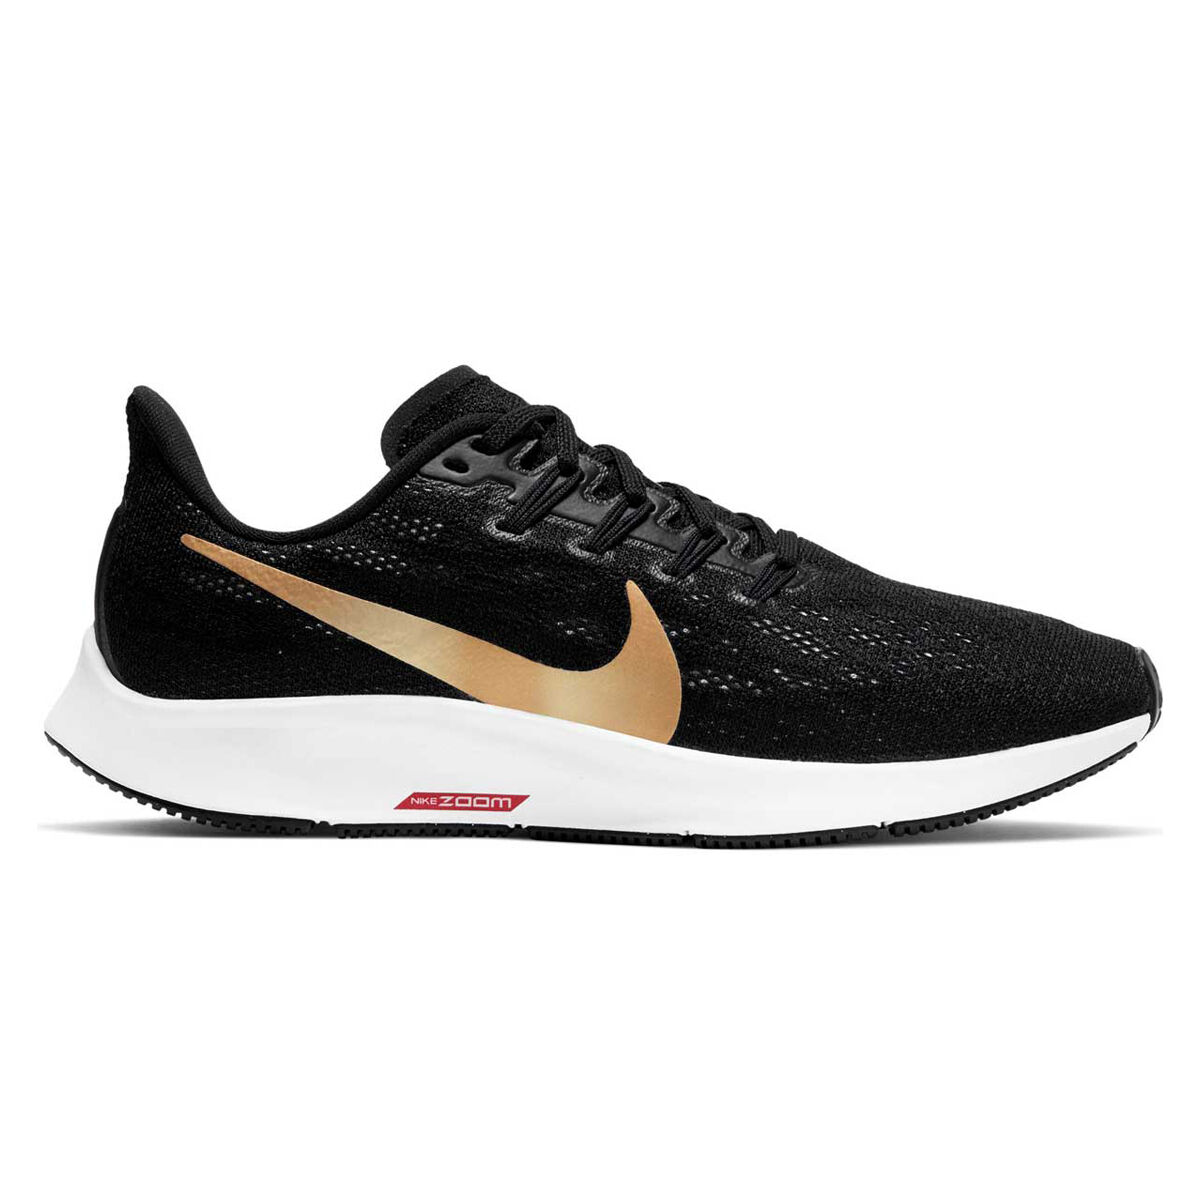 nike running pegagus 36 sneakers in black with gold swoosh